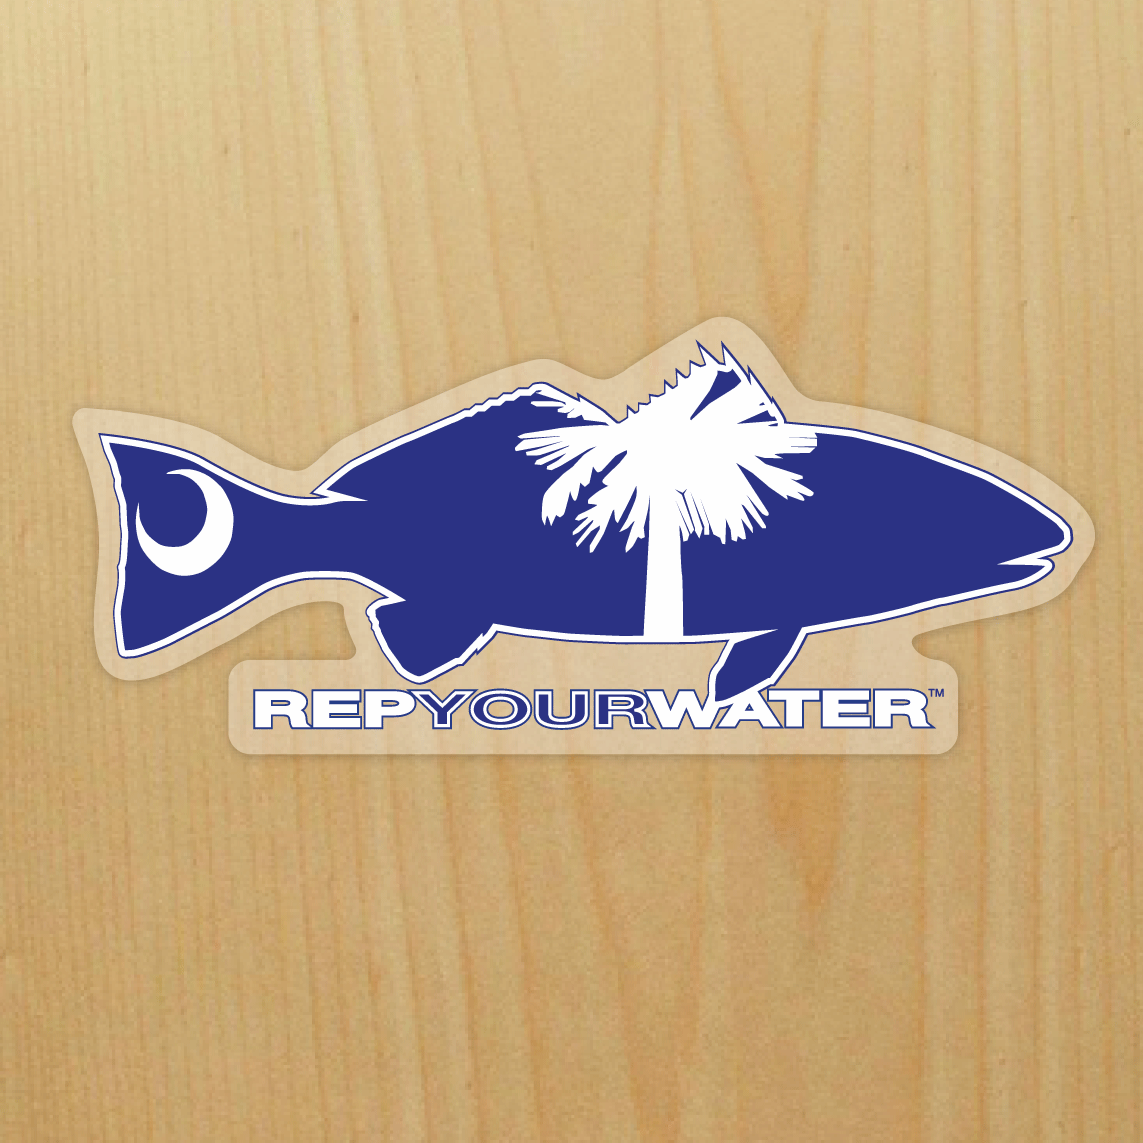 A sticker on a wood background  features a redfishwith a palm tree and moon inside above the words repyourwater